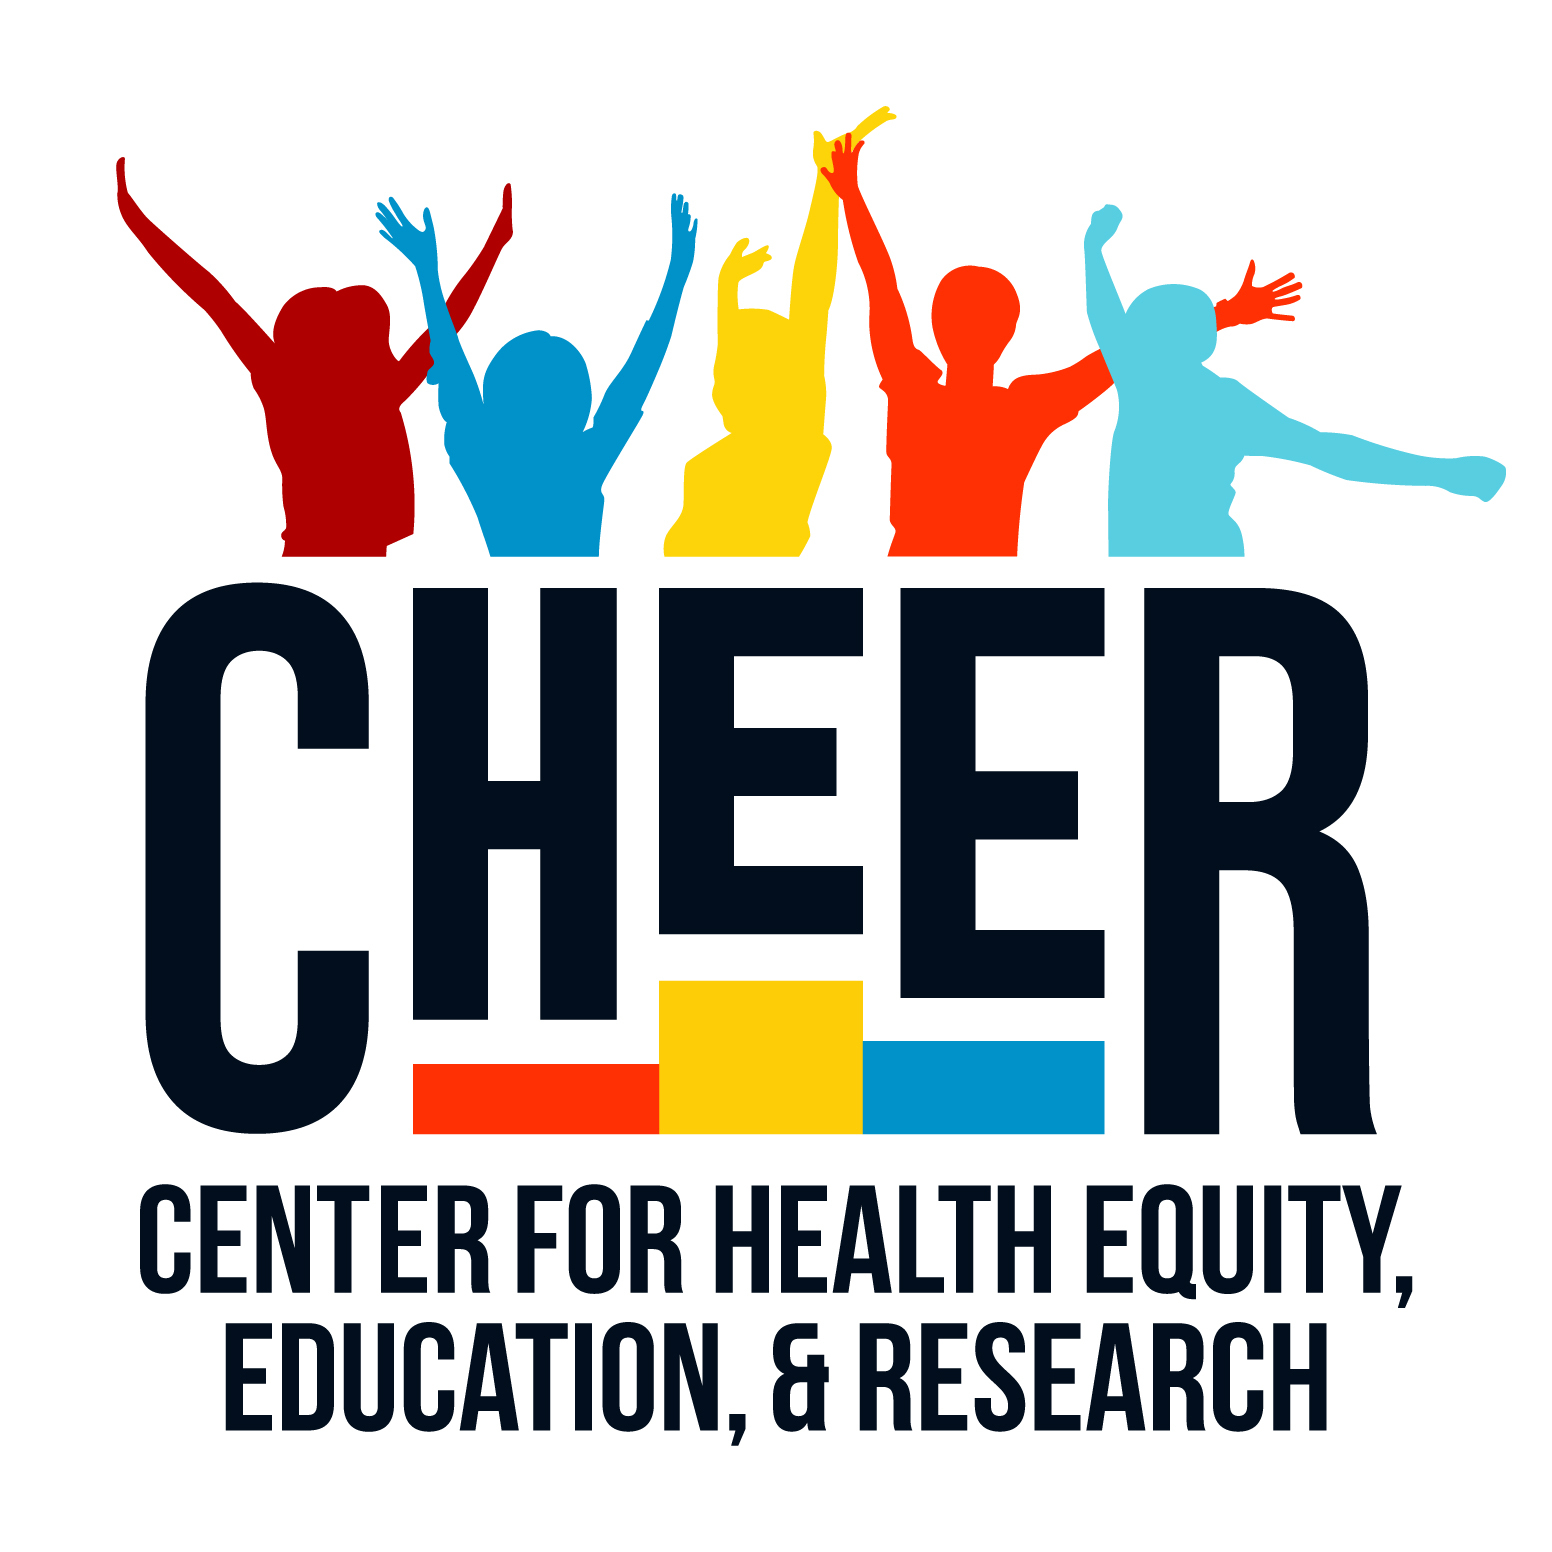 Center for Health Equity, Education and Research logo